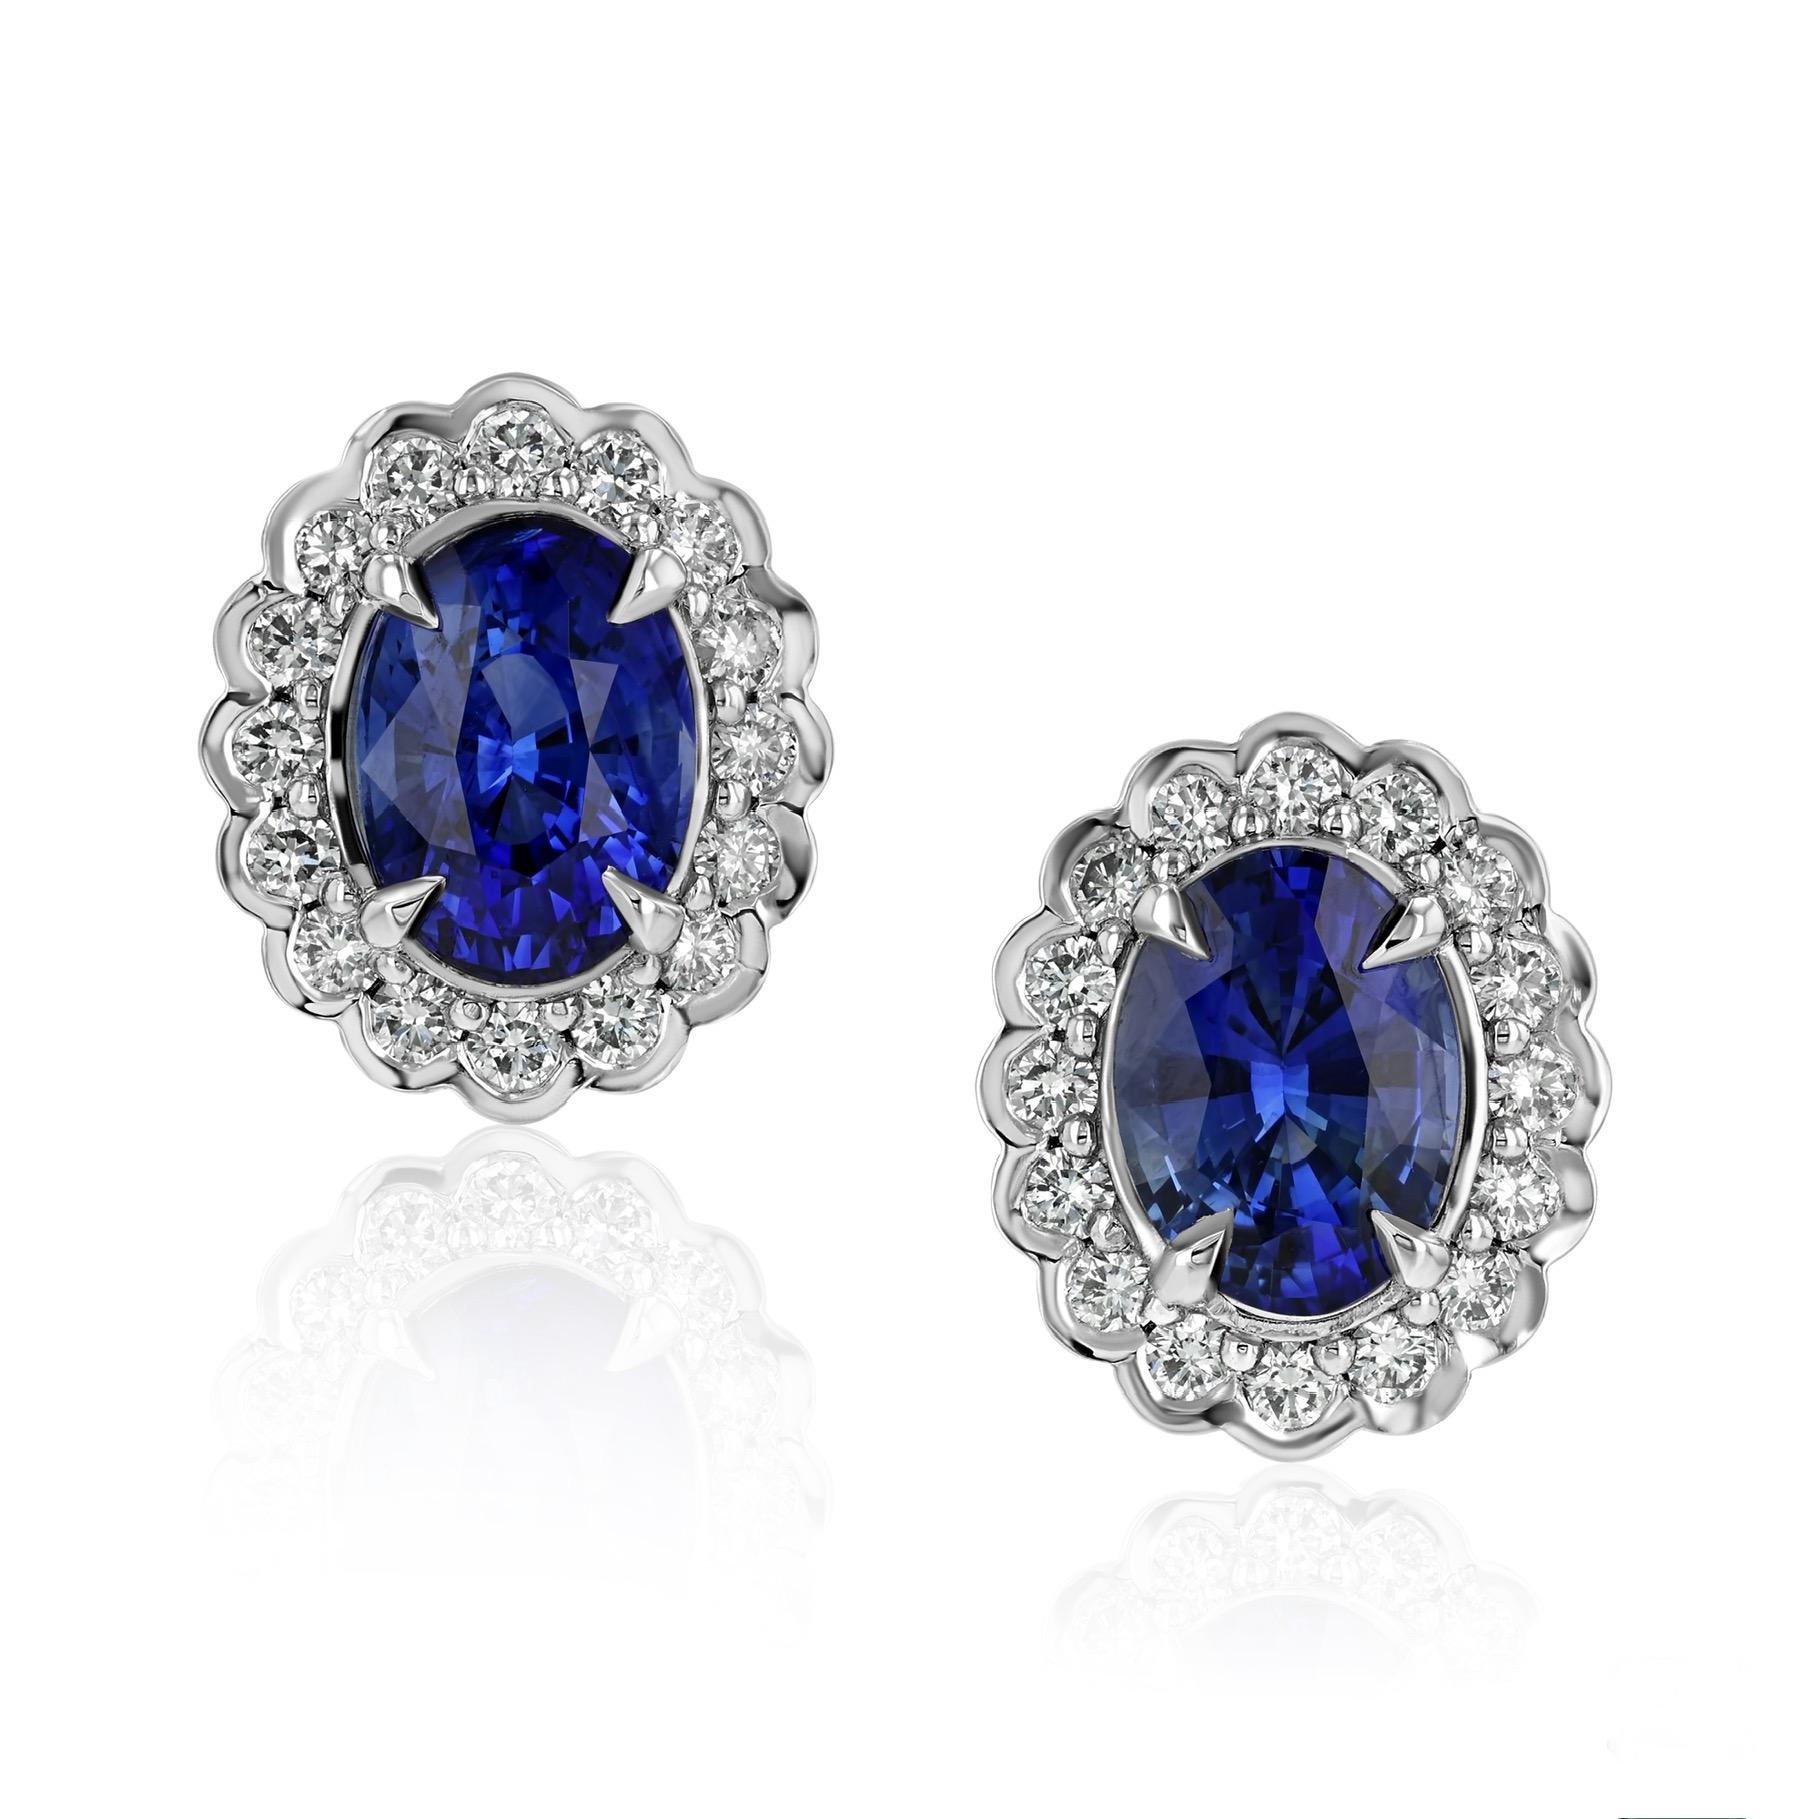 Platinum earrings, featuring 3.09 cts of GIA certified Ceylon sapphires highlighted by round diamonds totaling 0.54 cts. 